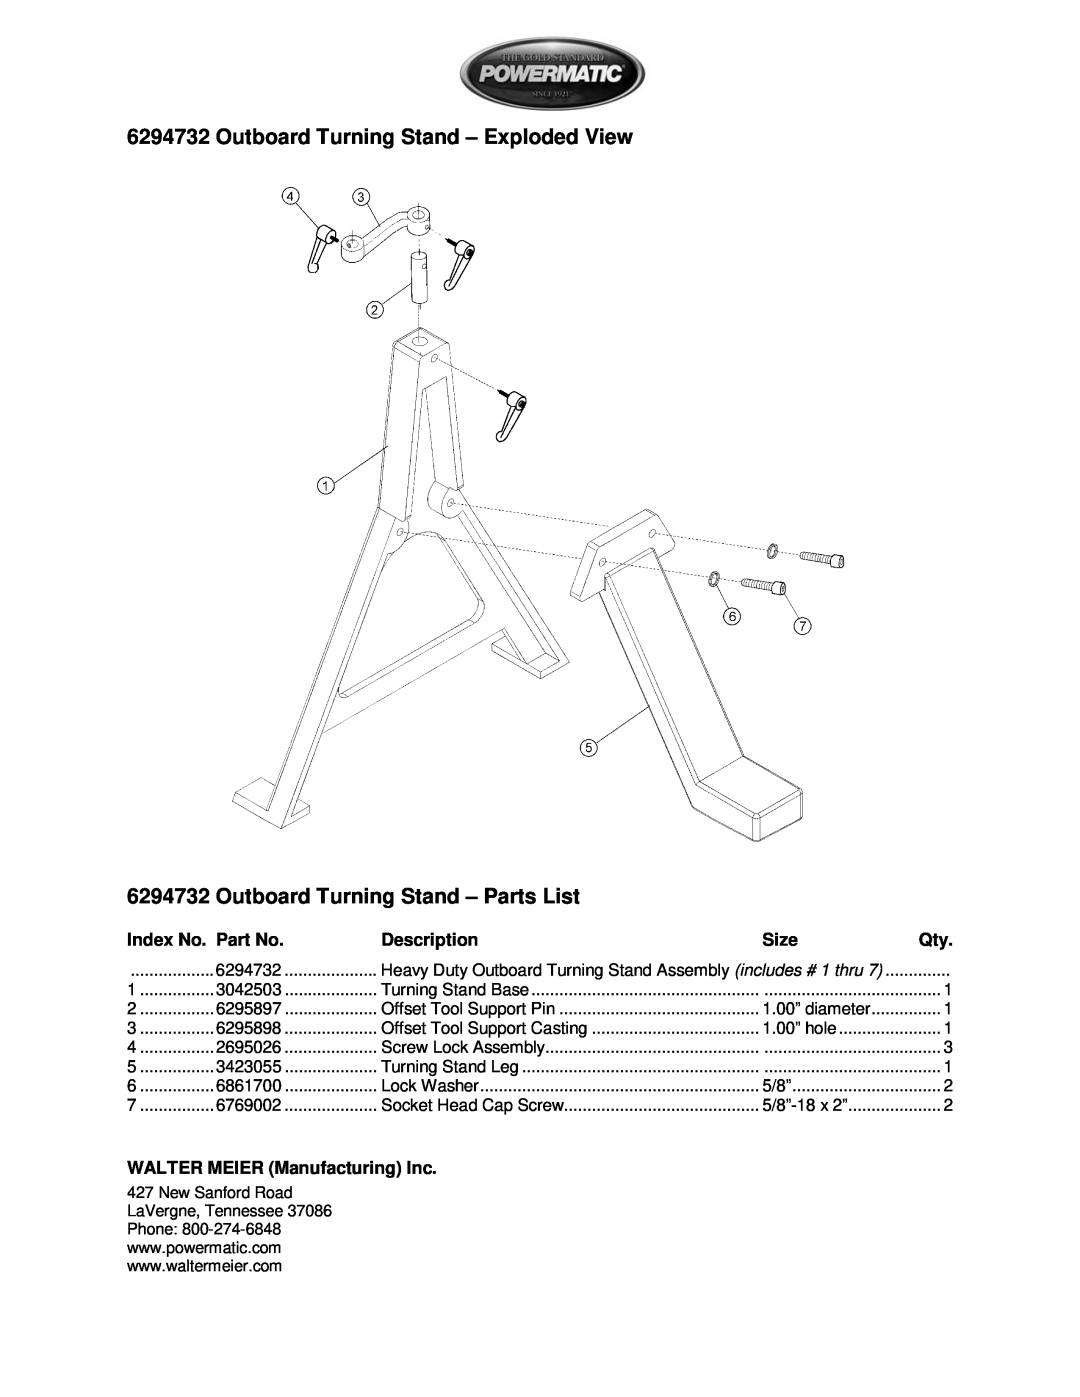 Powermatic 6294732 manual Outboard Turning Stand - Exploded View, Outboard Turning Stand - Parts List, Index No. Part No 